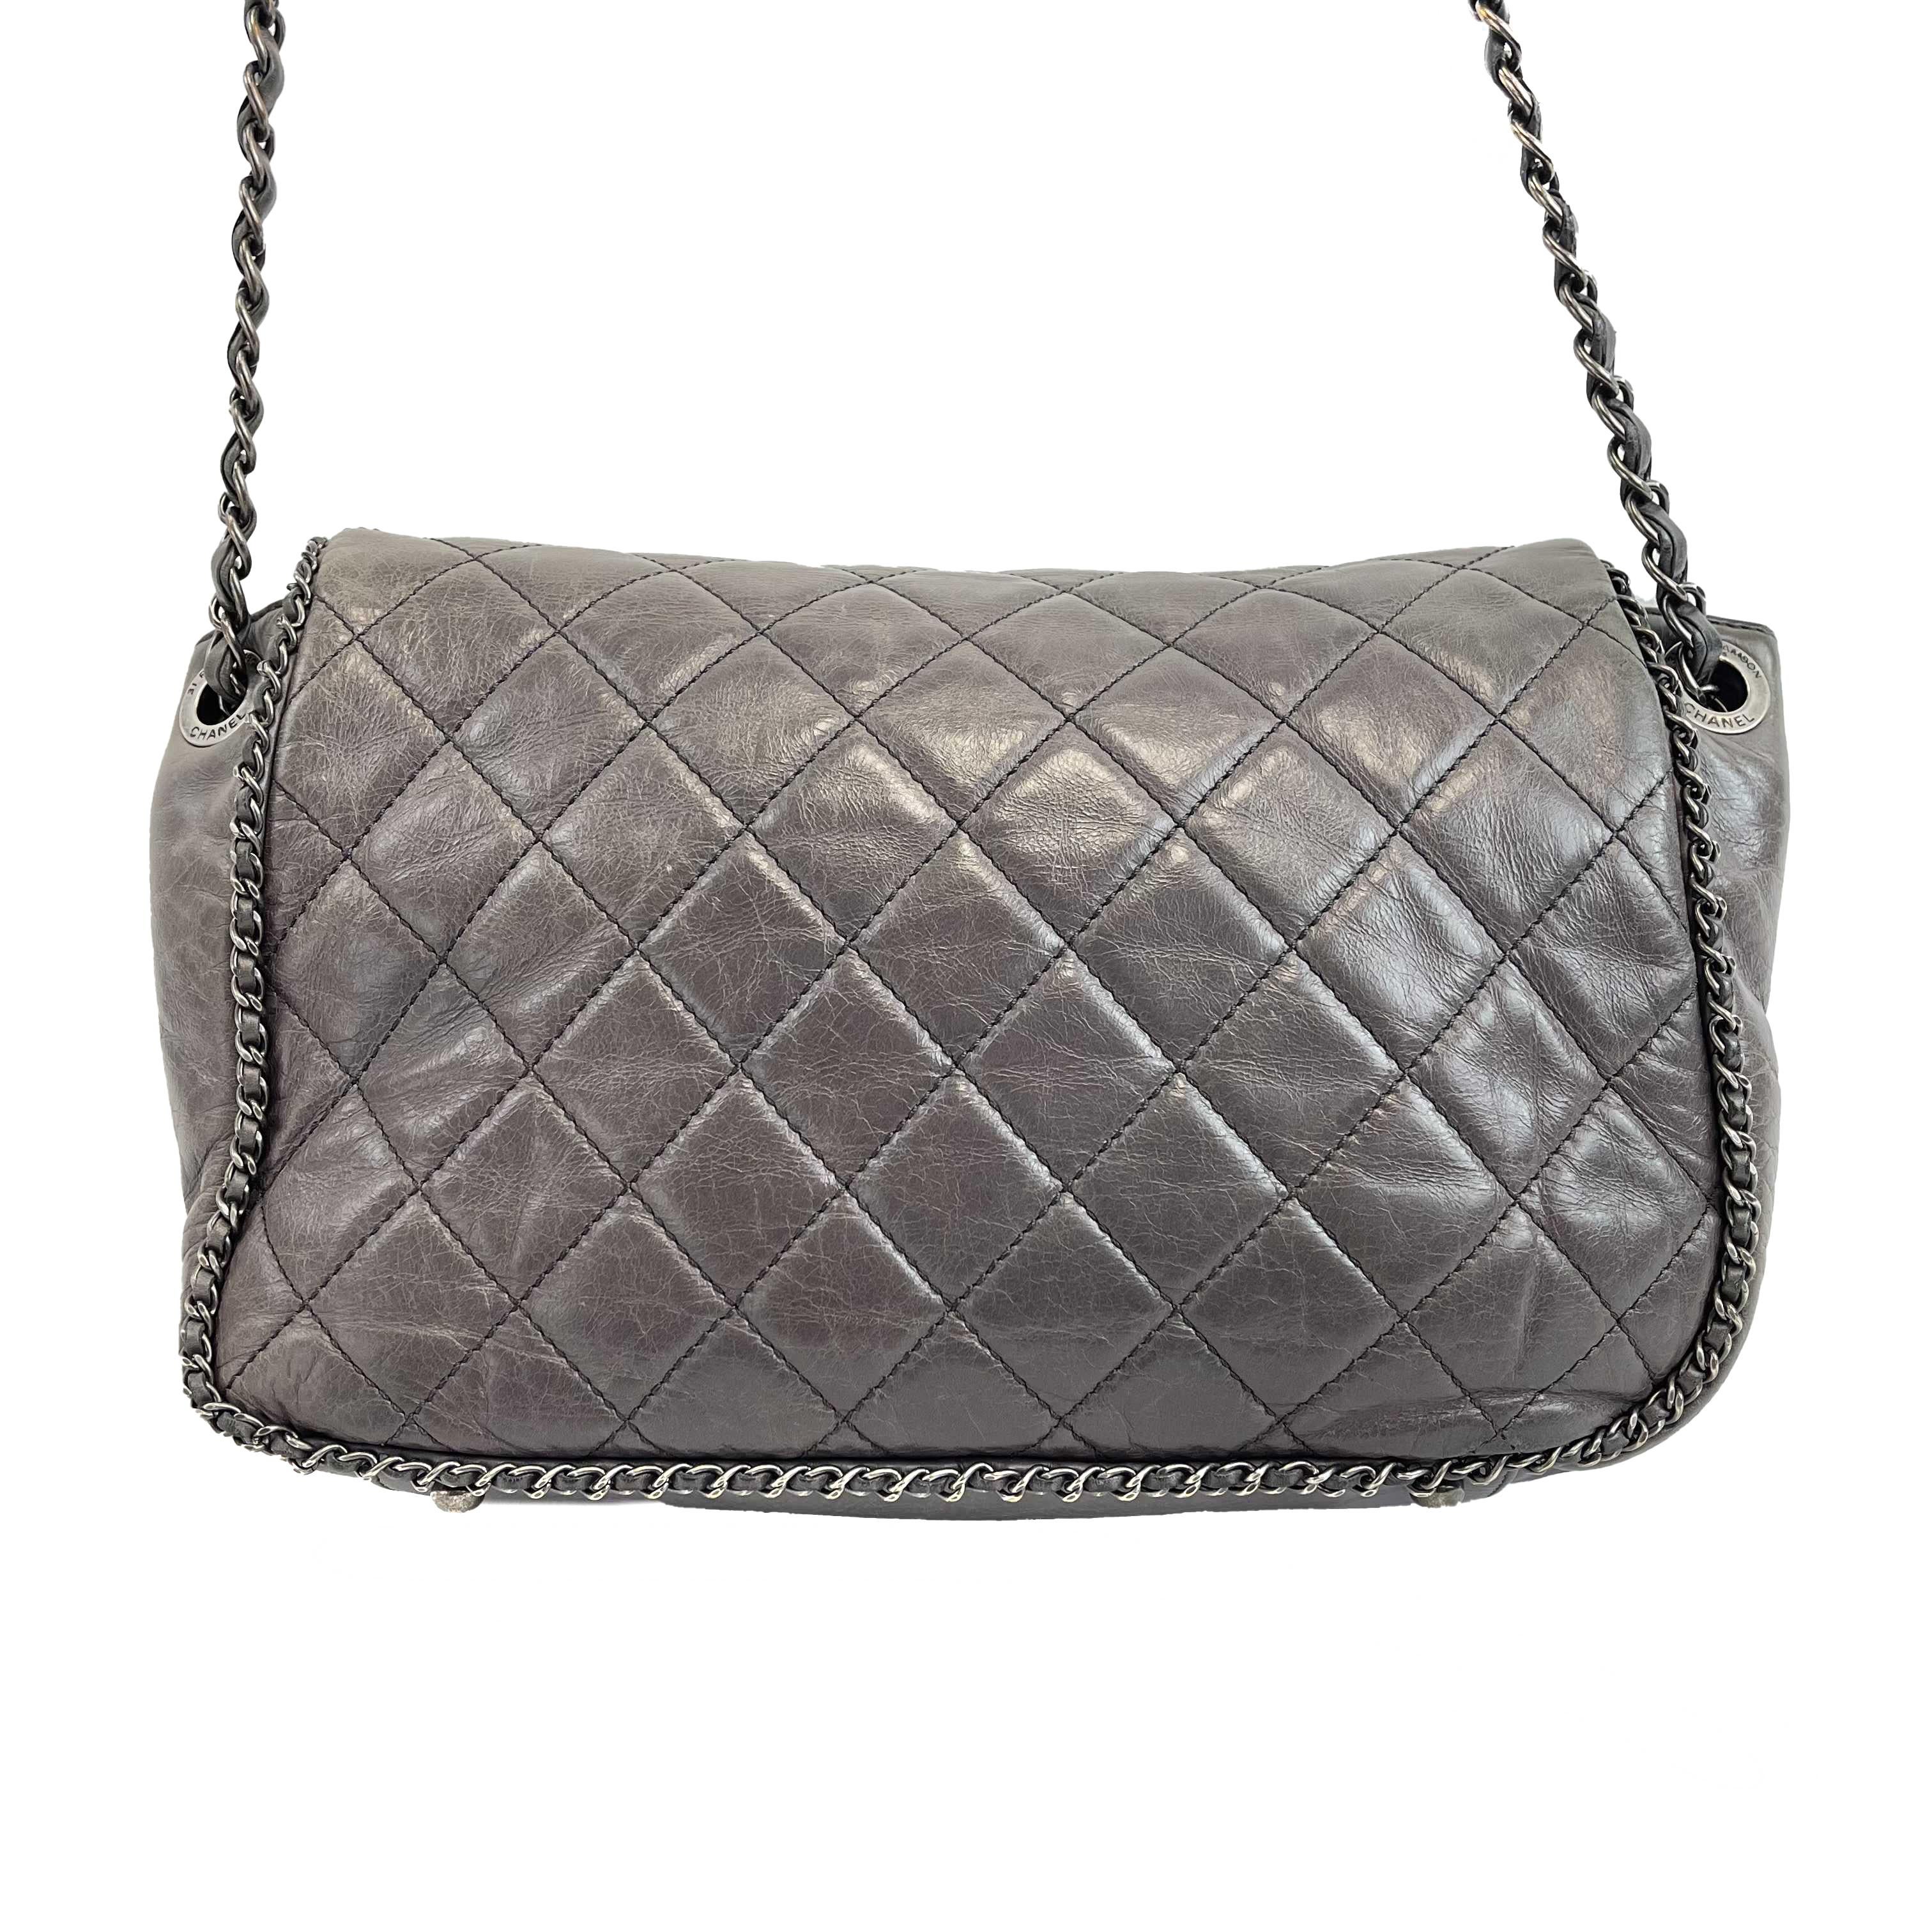 CHANEL - Calfskin Quilted Large CC Enchained Accordion - Gray Shoulder Bag

Description

* Circa 2015-16
* Diamond quilted gray calfskin leather
* Ruthenium chain intertwined with leather with leather shoulder pad
* Ruthenium Chanel CC turn lock
*